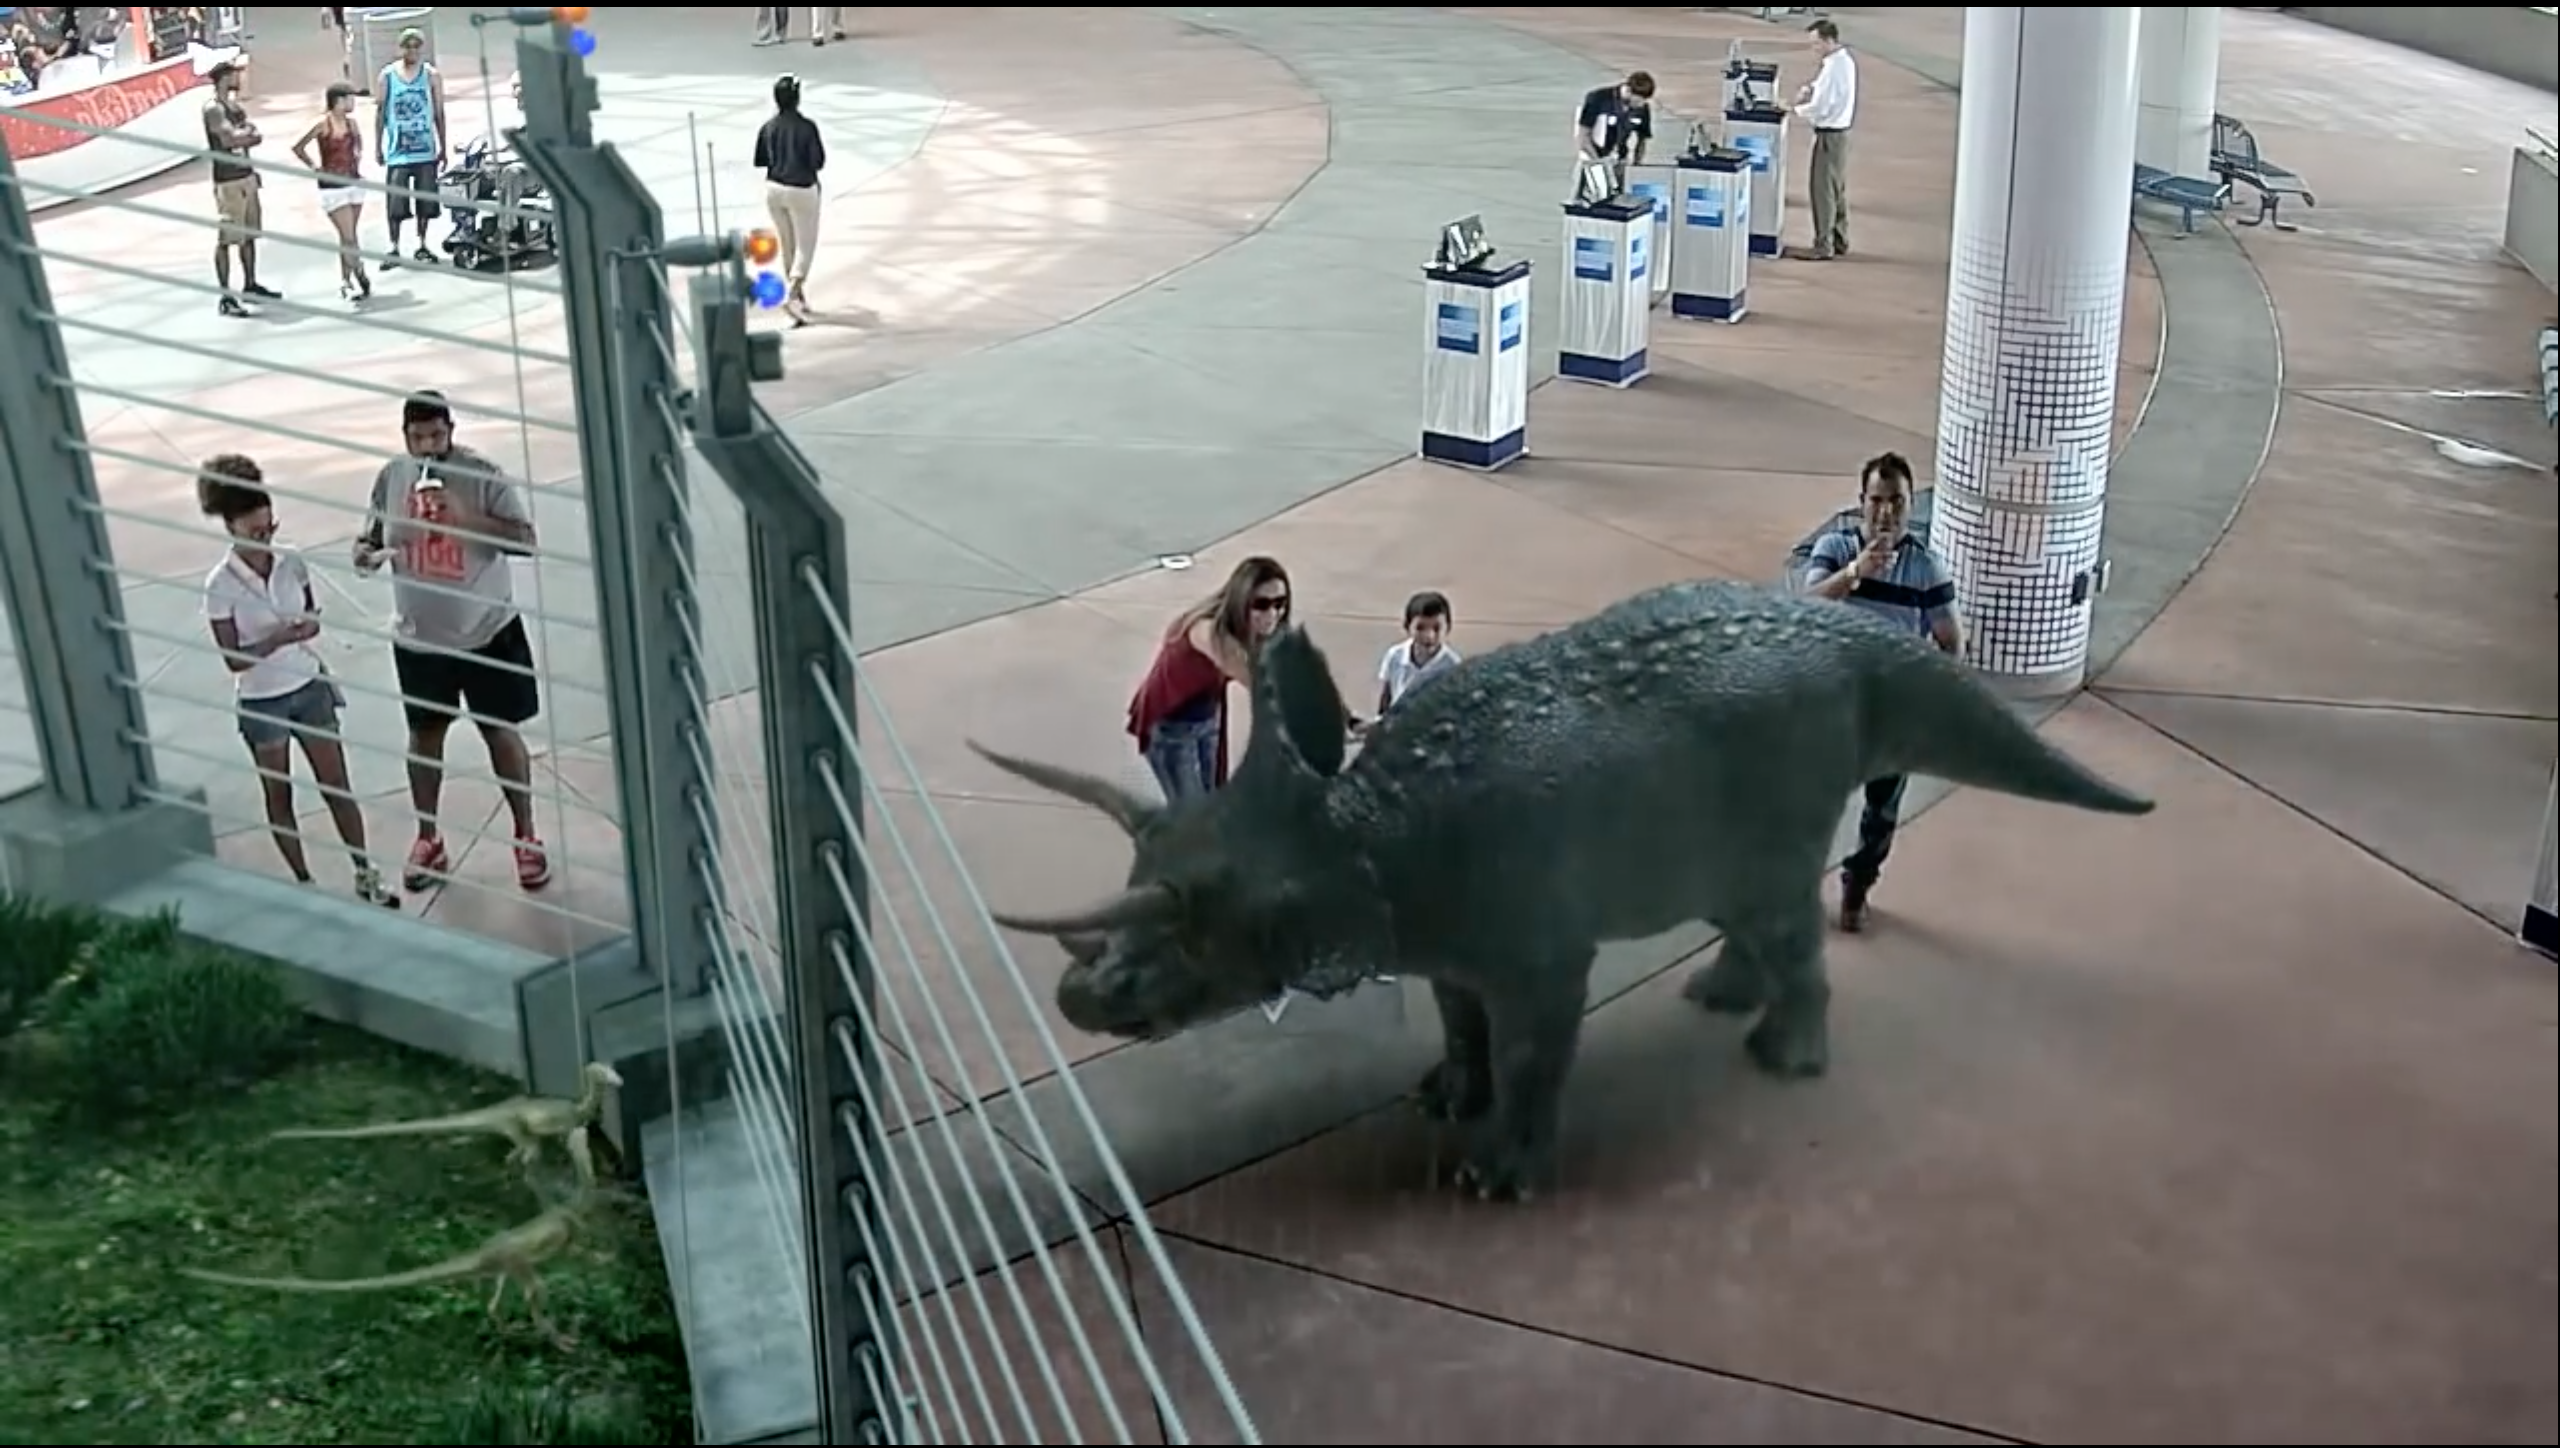 Jurassic Park Augmented Reality experience at Universal Studios, Orlando - by INDE